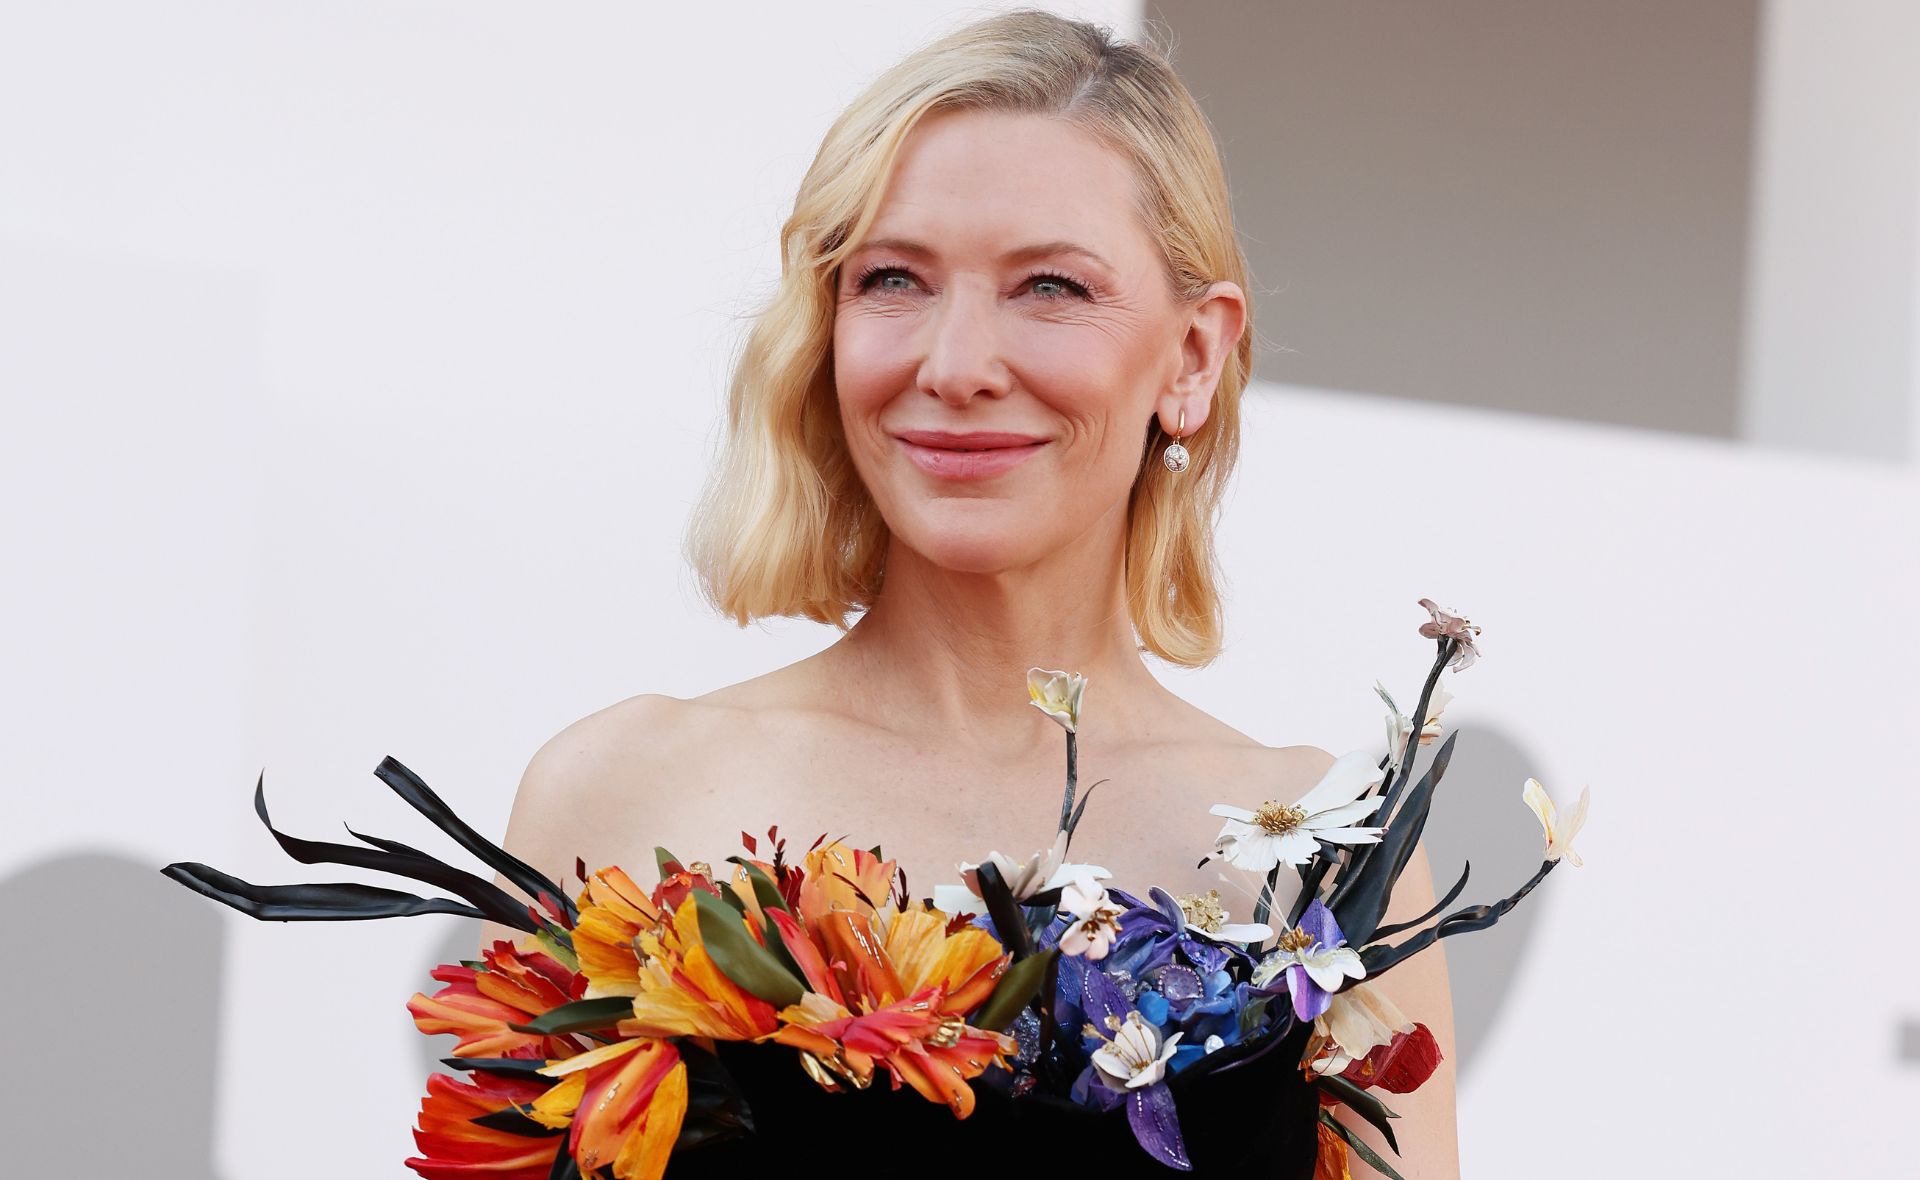 Cate Blanchett’s retirement plans: “I don’t ever want to work again”